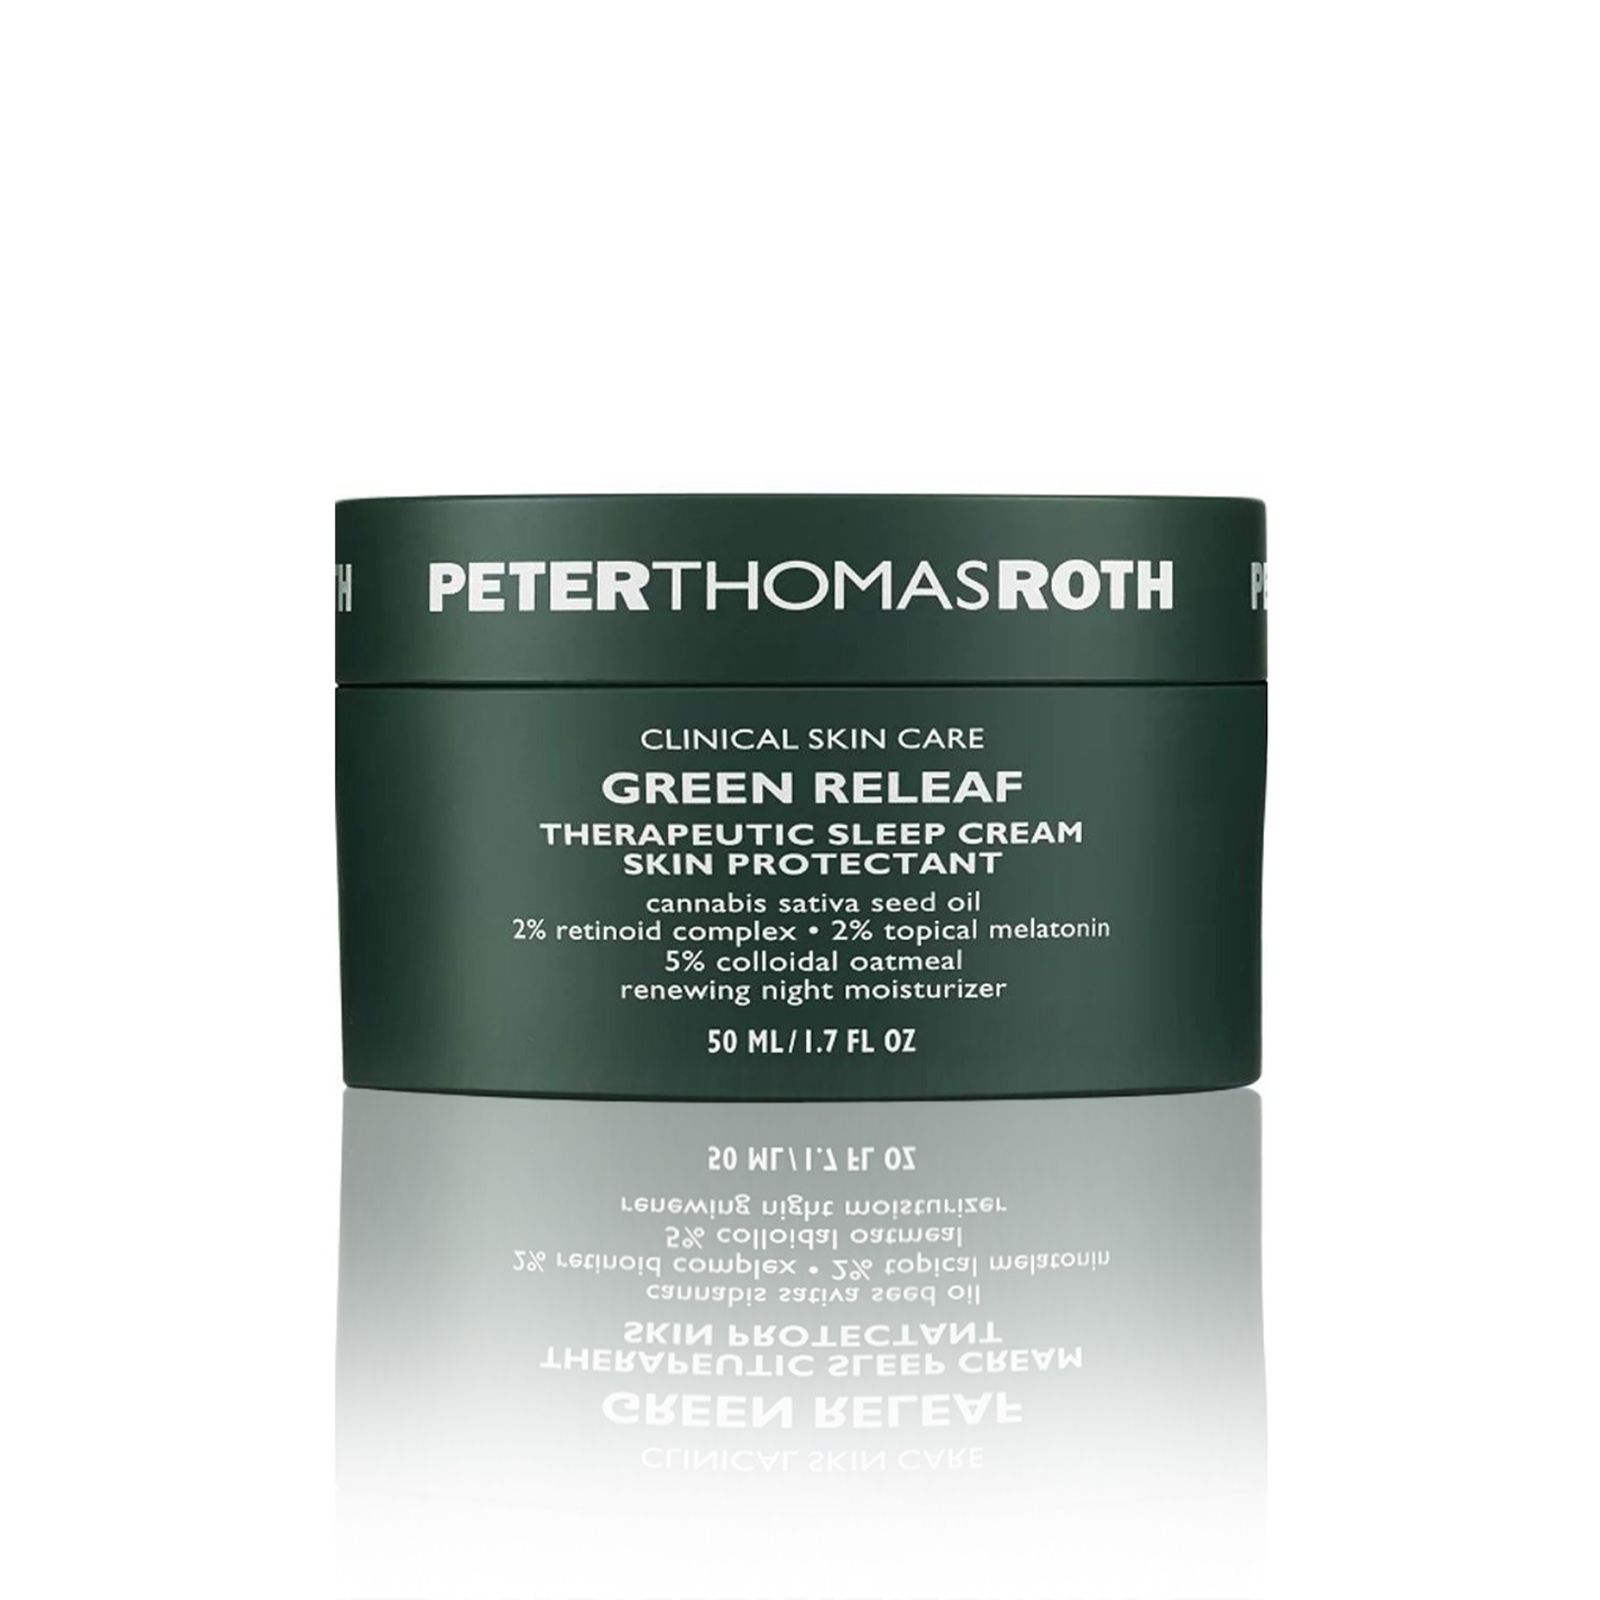 Peter Thomas Roth Green Releaf Therapeutic Sleep Cream Skin Protectant